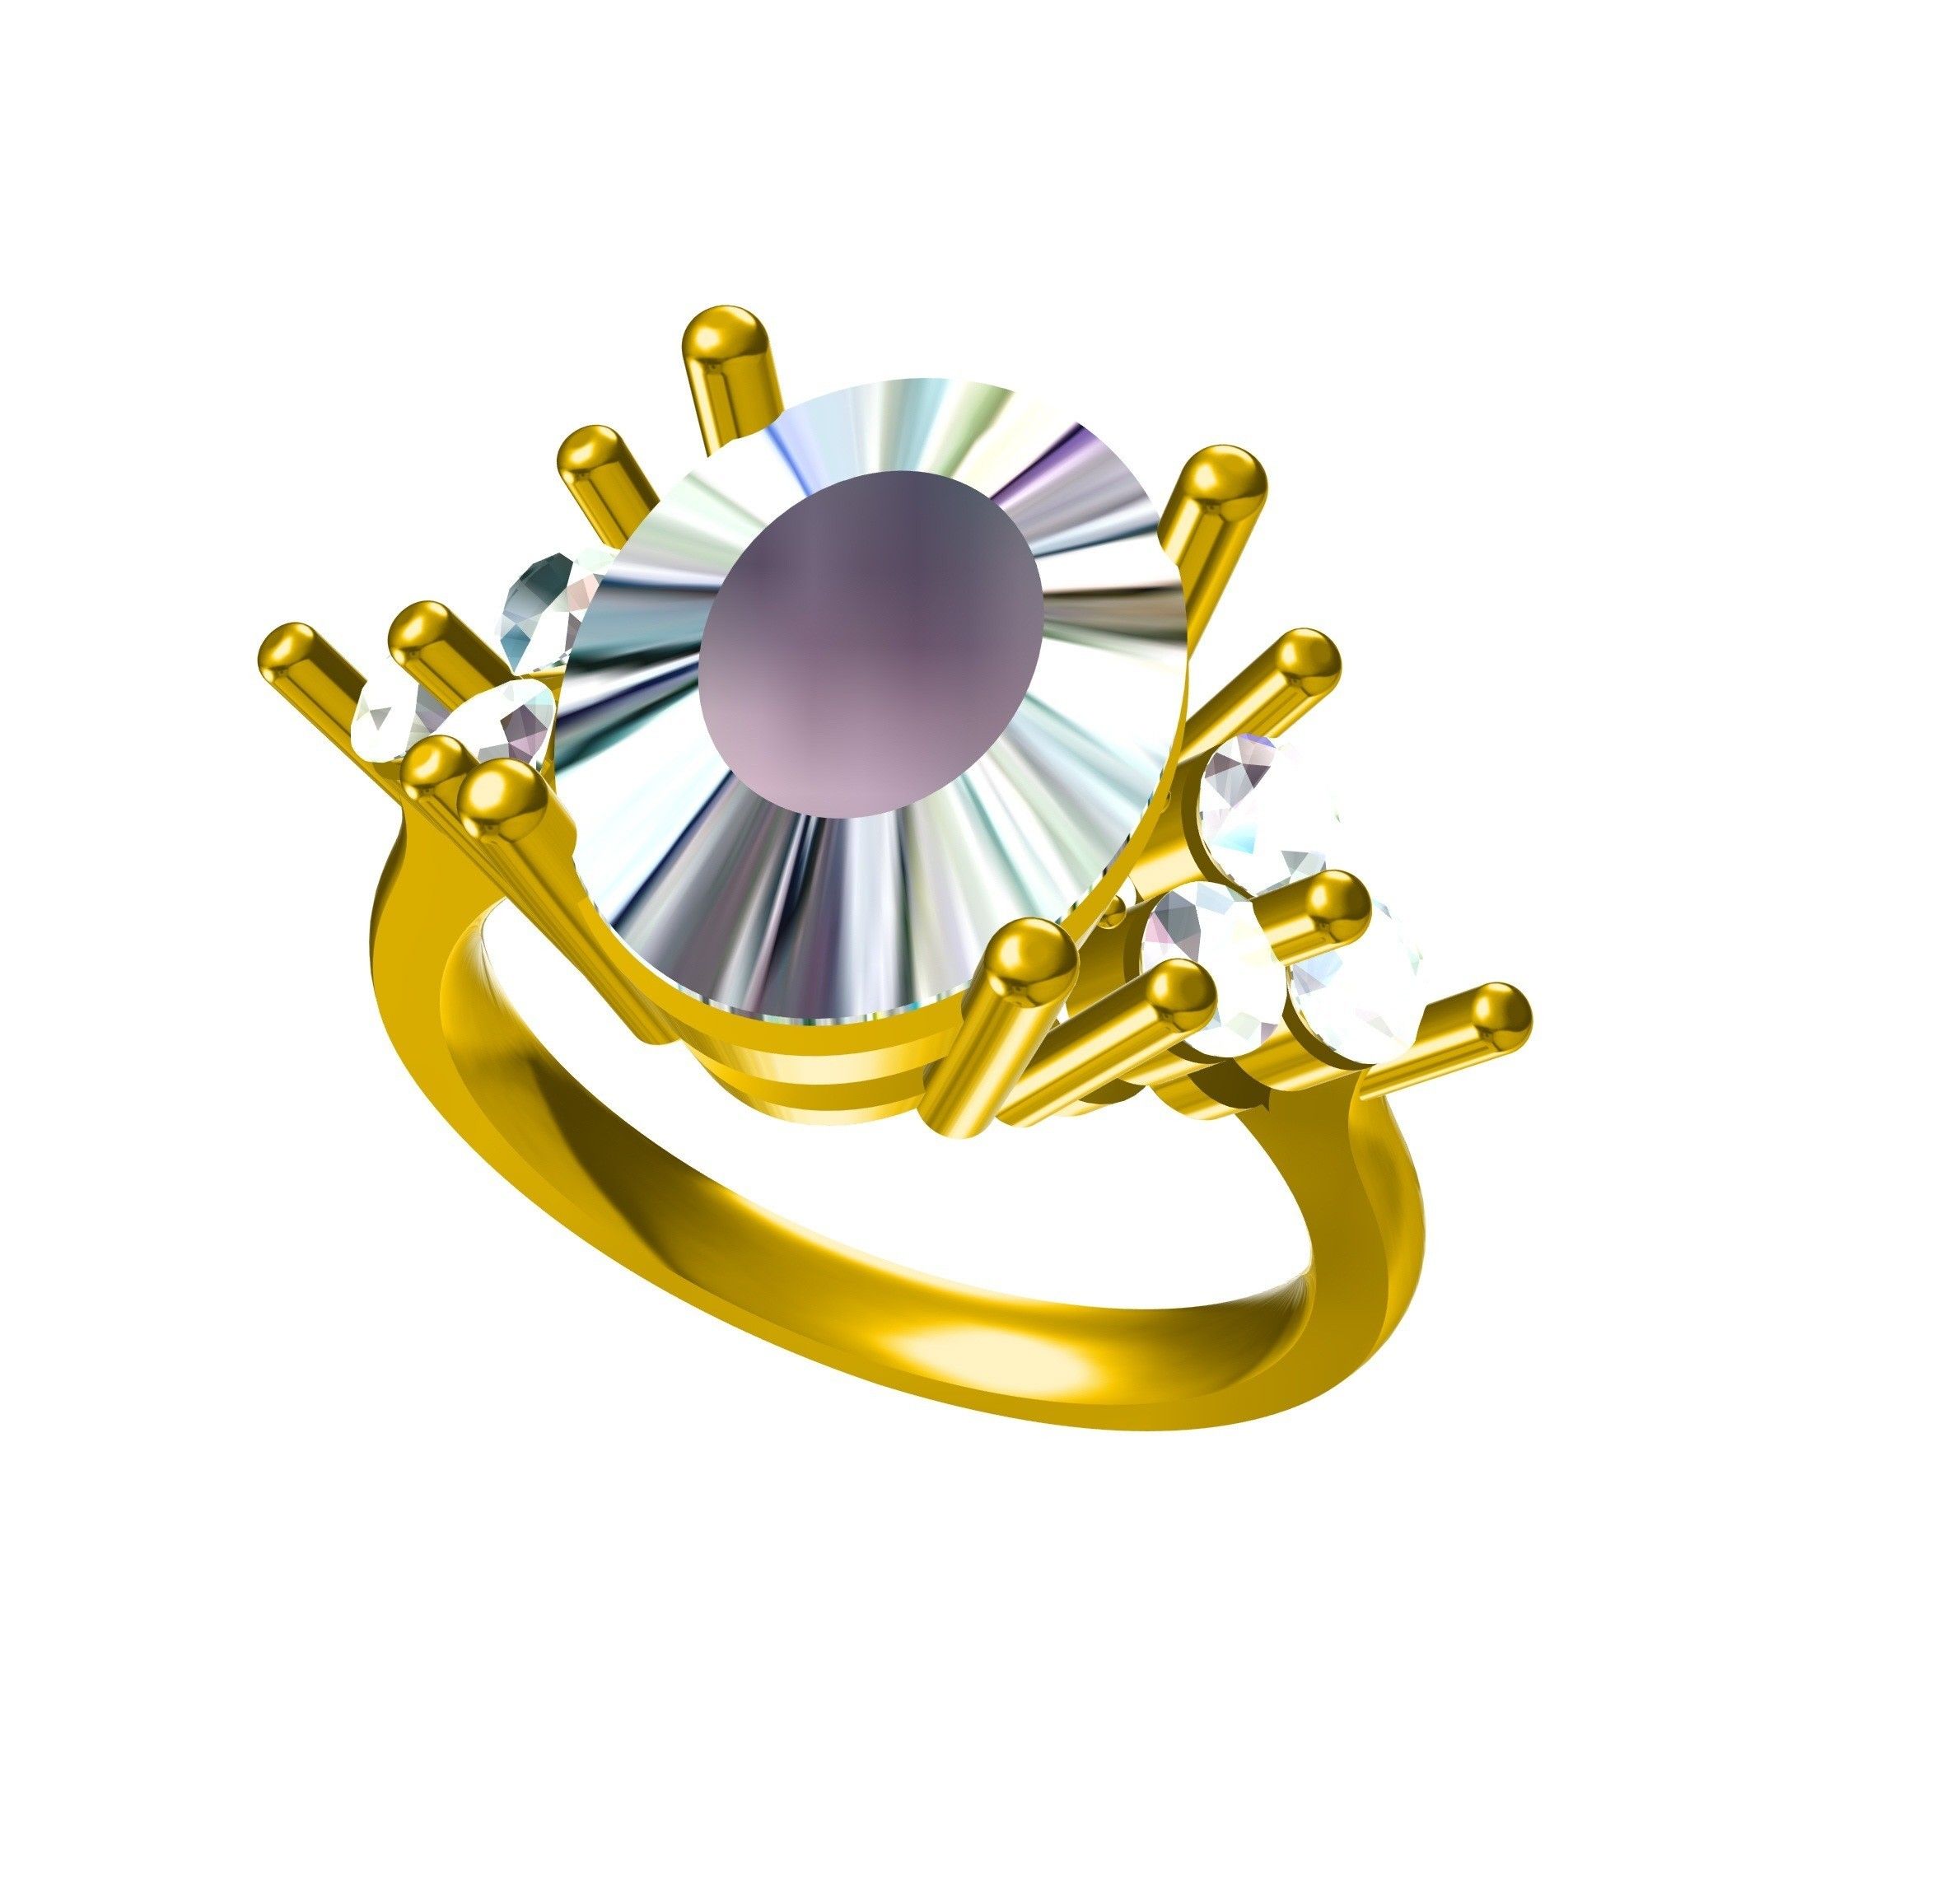 RG27231.jpg Download STL file Jewelry 3D CAD Model Of Solitaire With Accents Ring • 3D printer object, VR3D